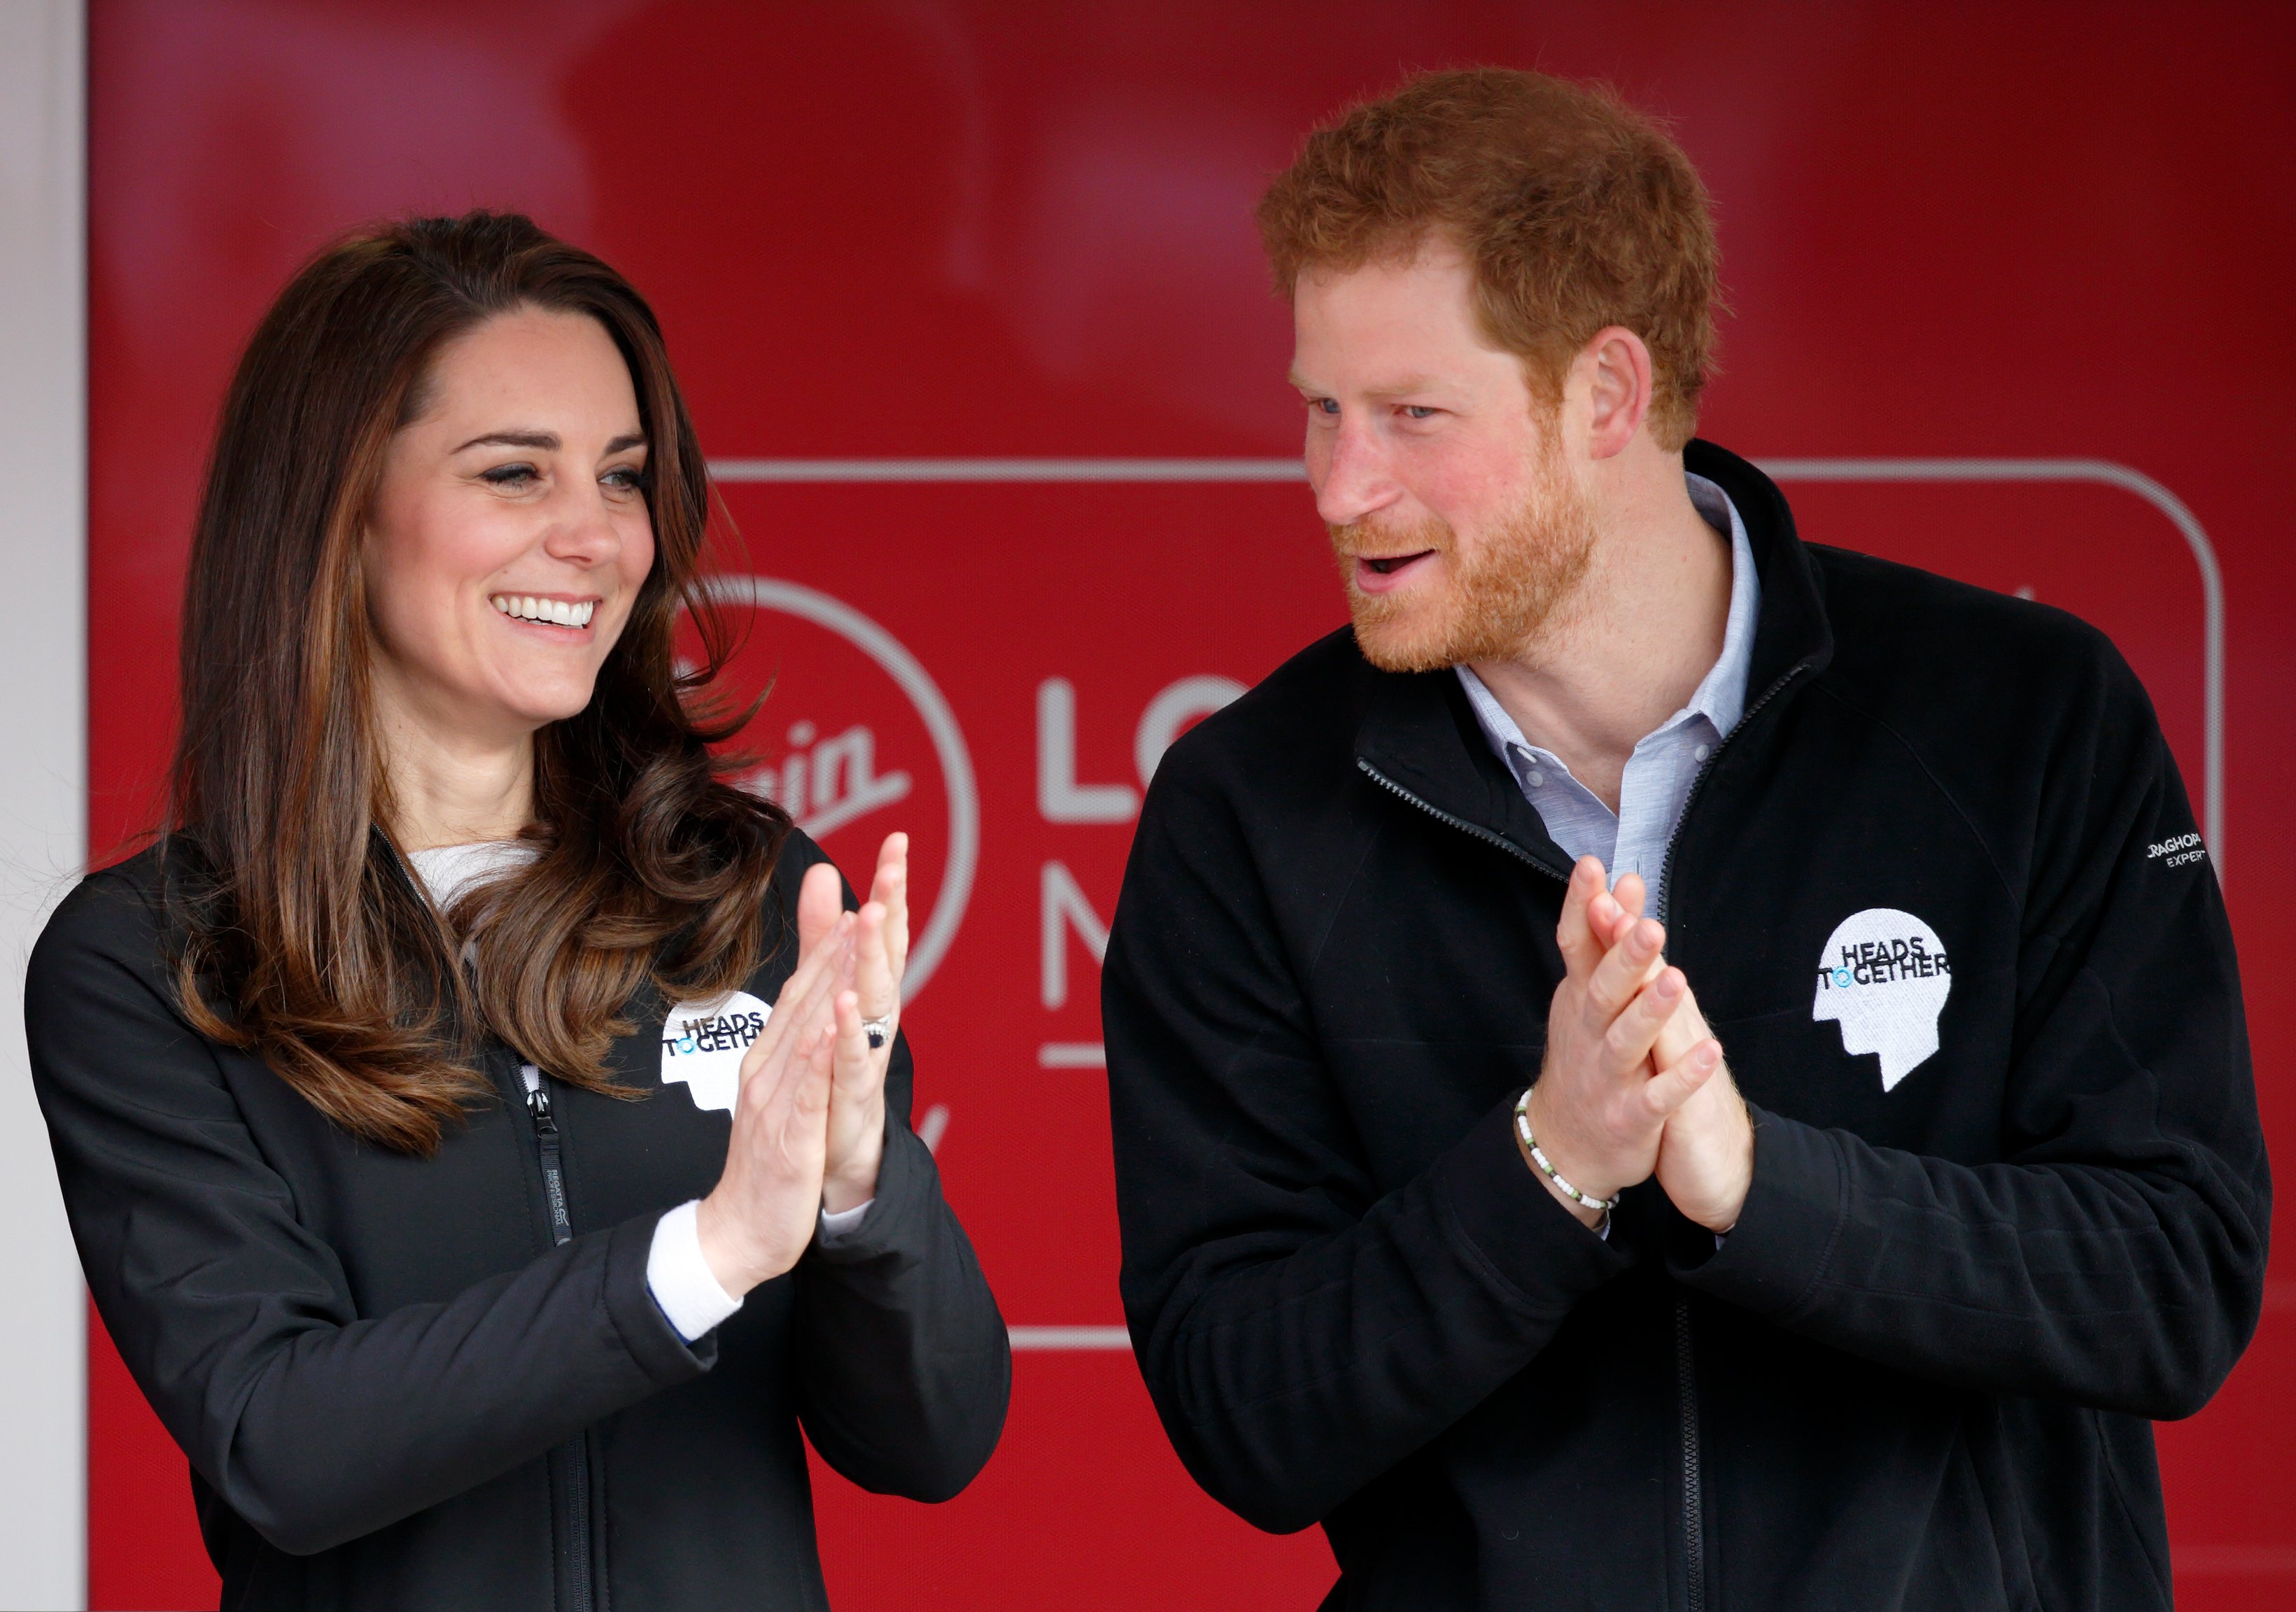 Prince Harry and Kate Middleton during the start of the 2017 Virgin Money London Marathon on April 23, 2017 in London, England. / Source: Getty Images